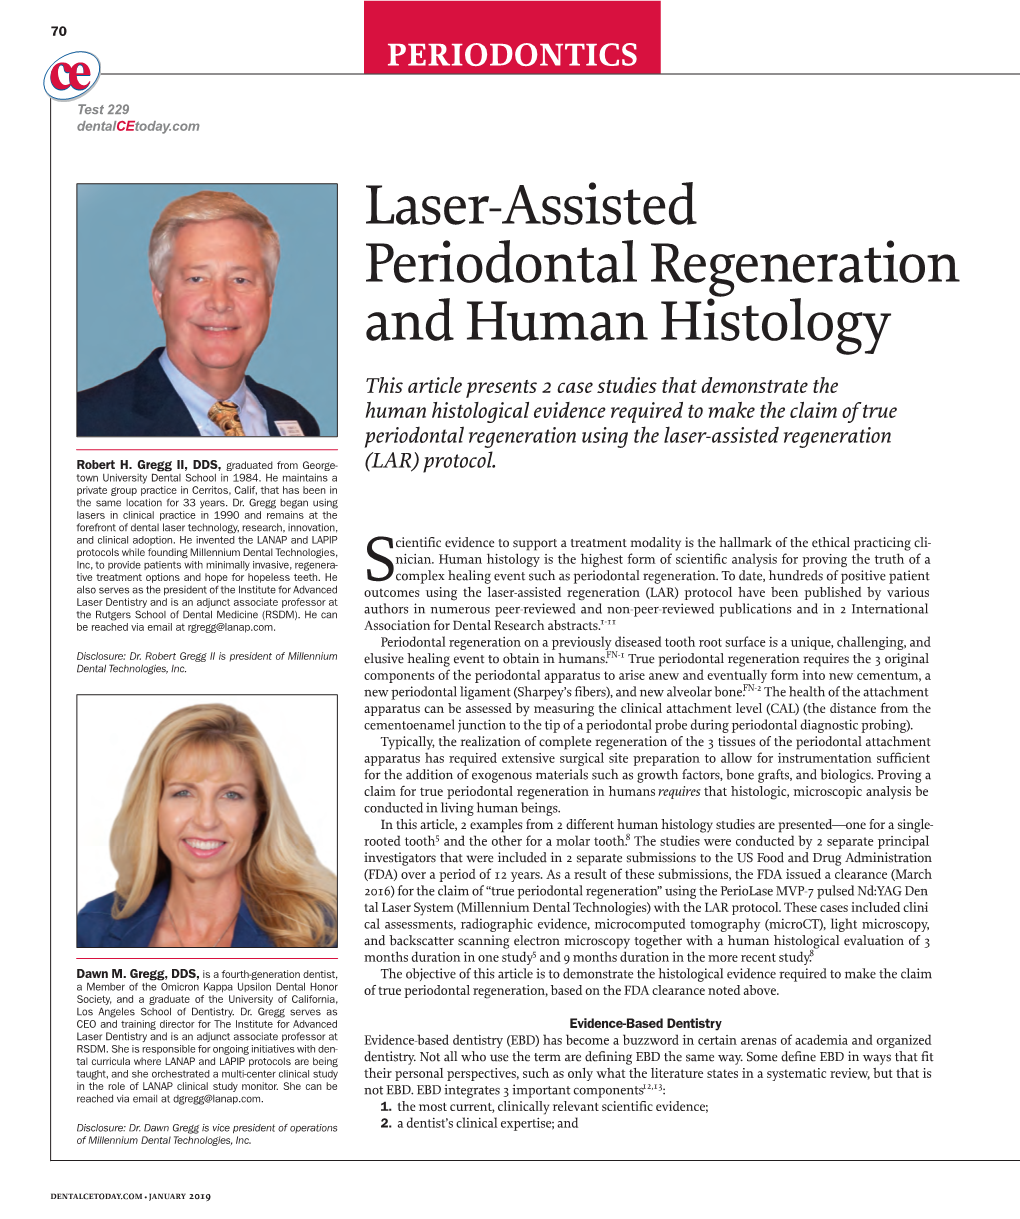 Laser-Assisted Periodontal Regeneration and Human Histology